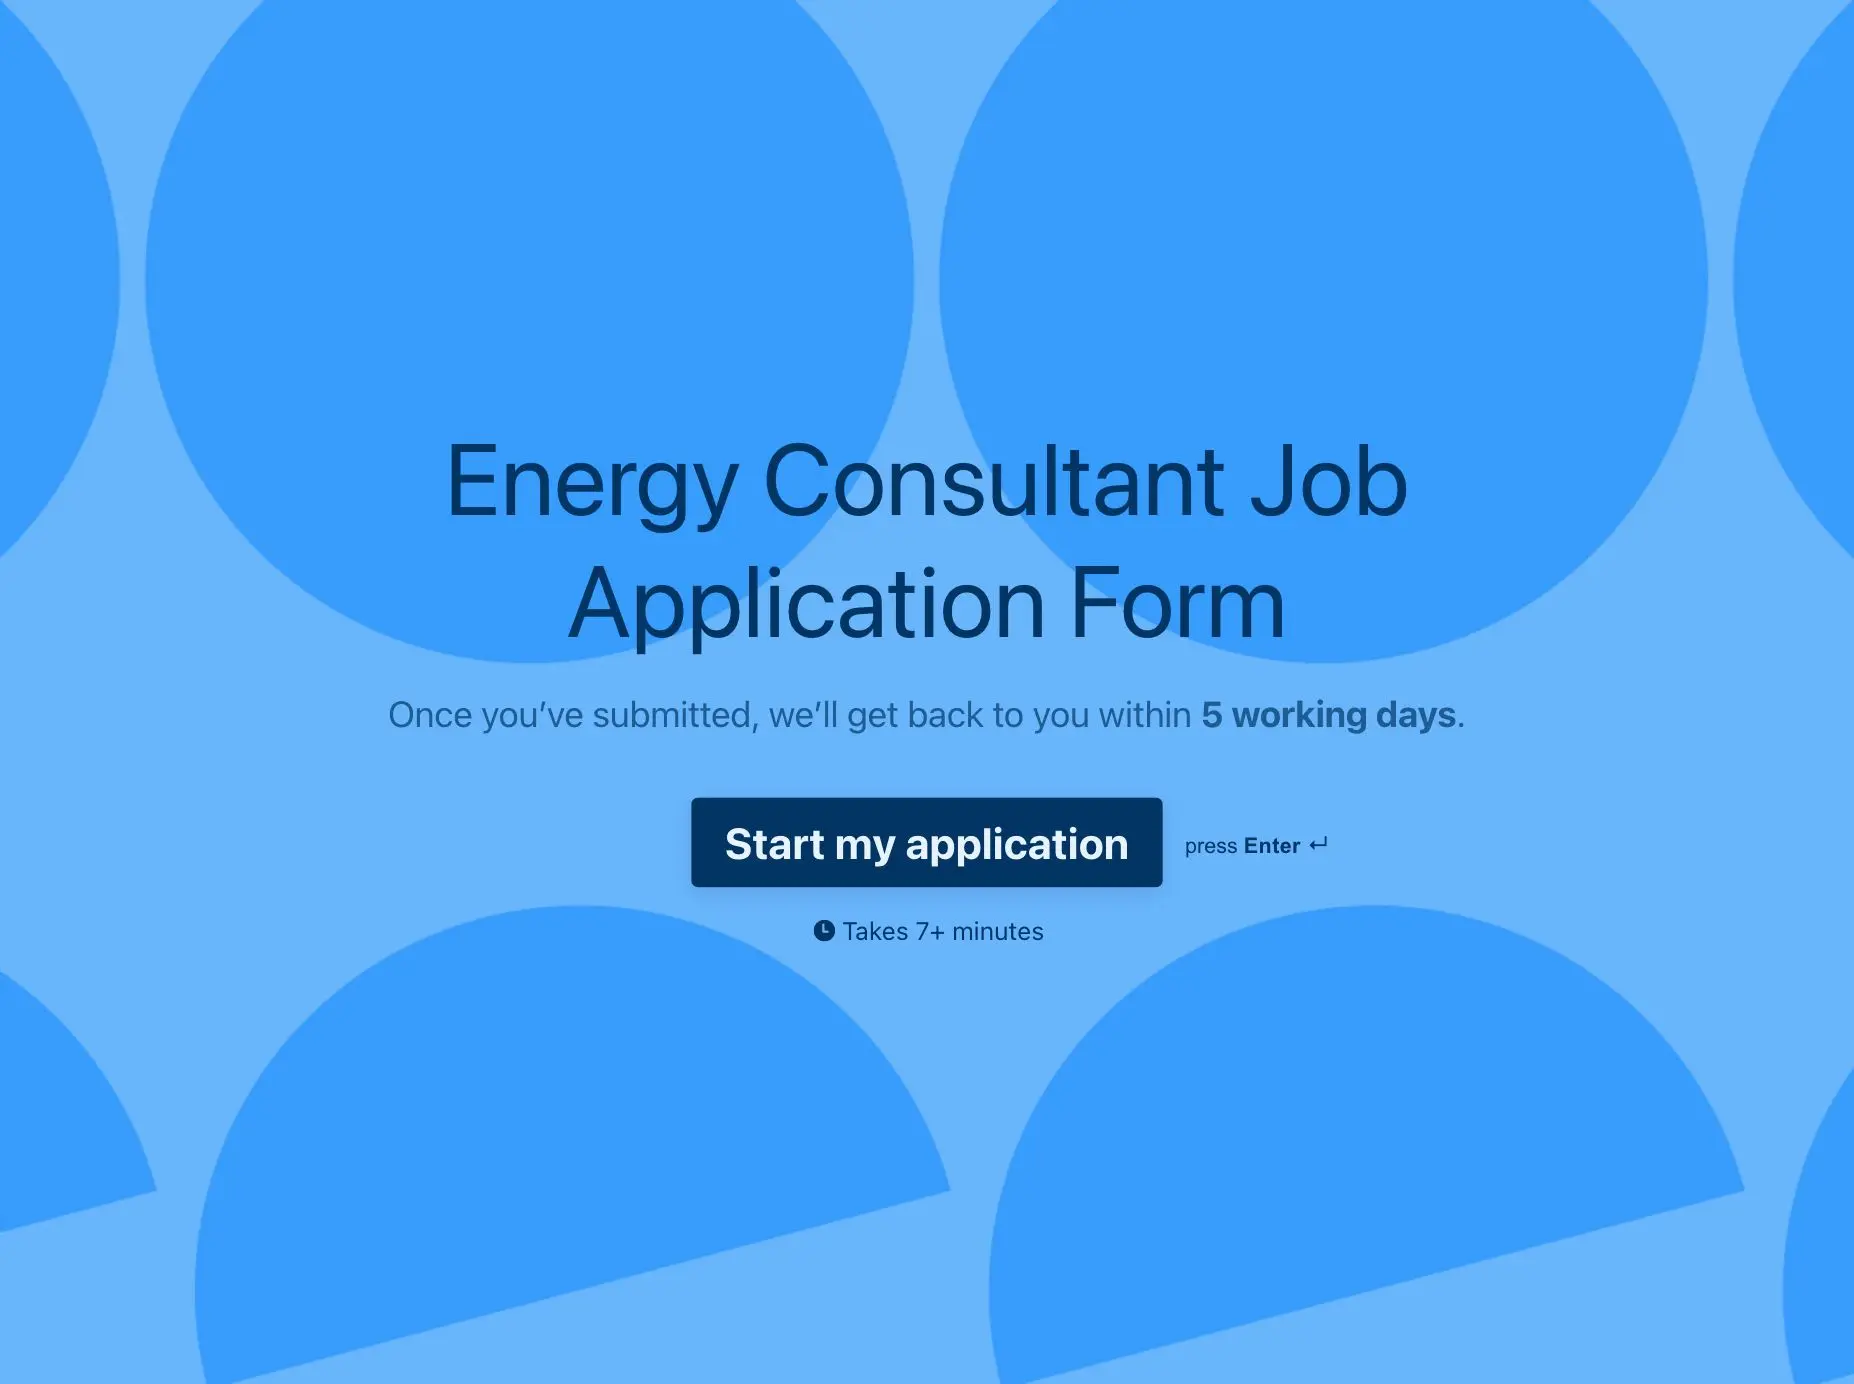 Energy Consultant Job Application Form Template Hero